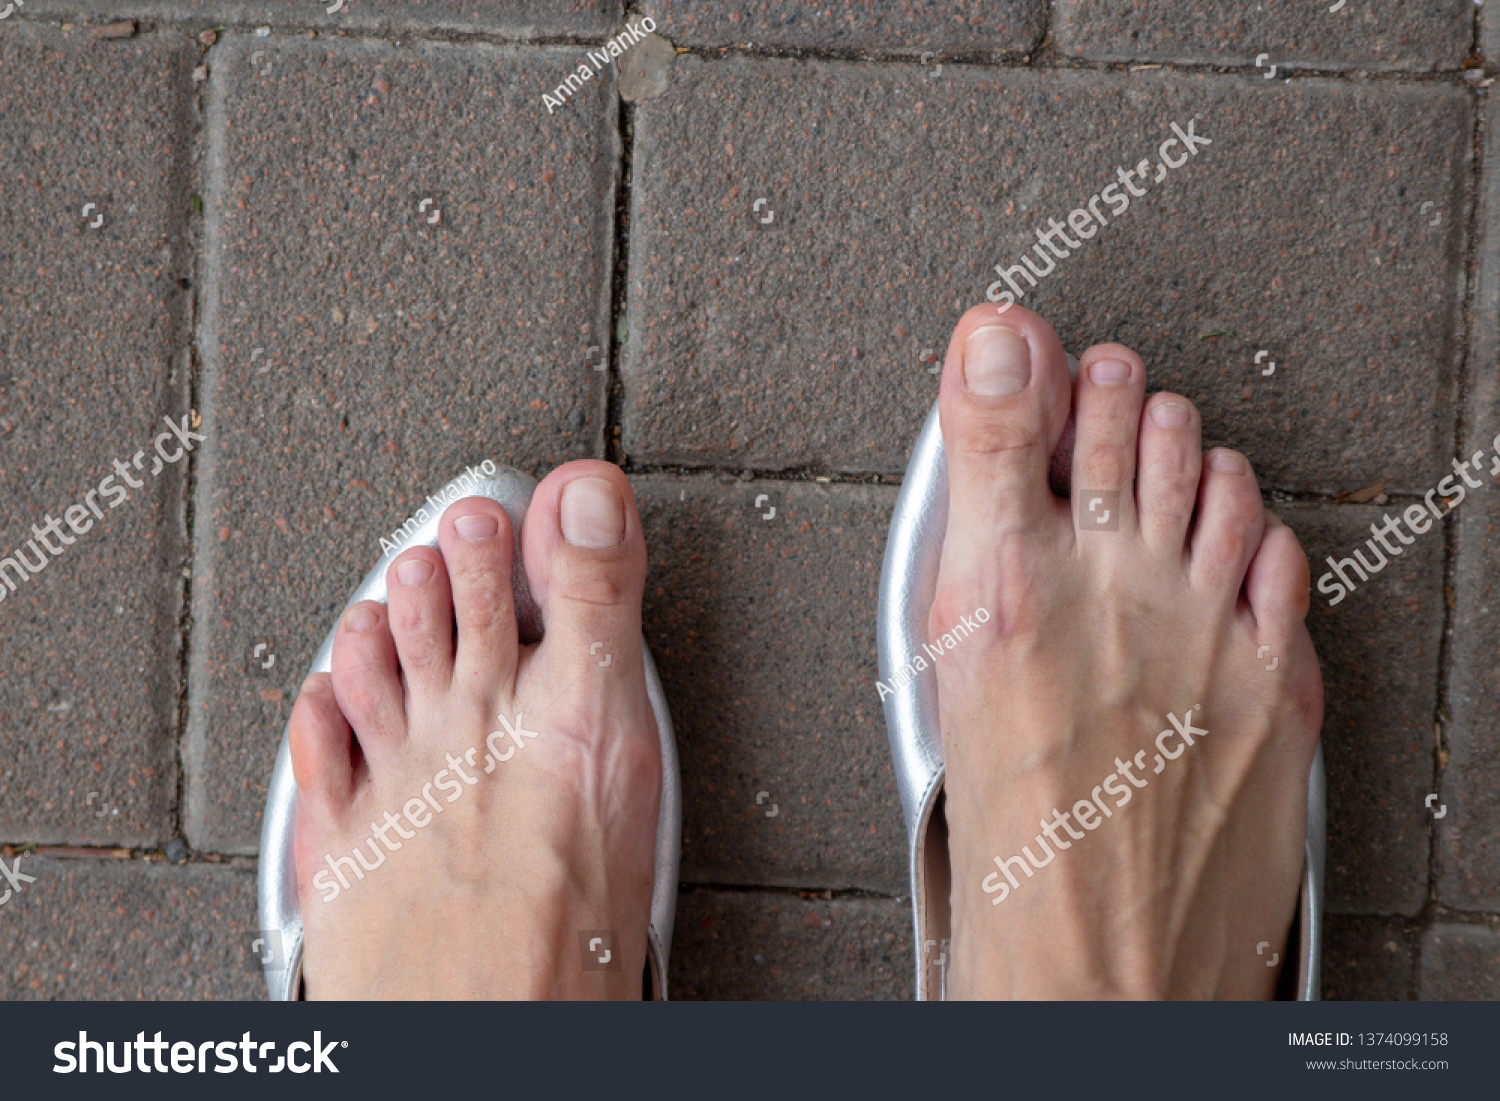 foot without shoes